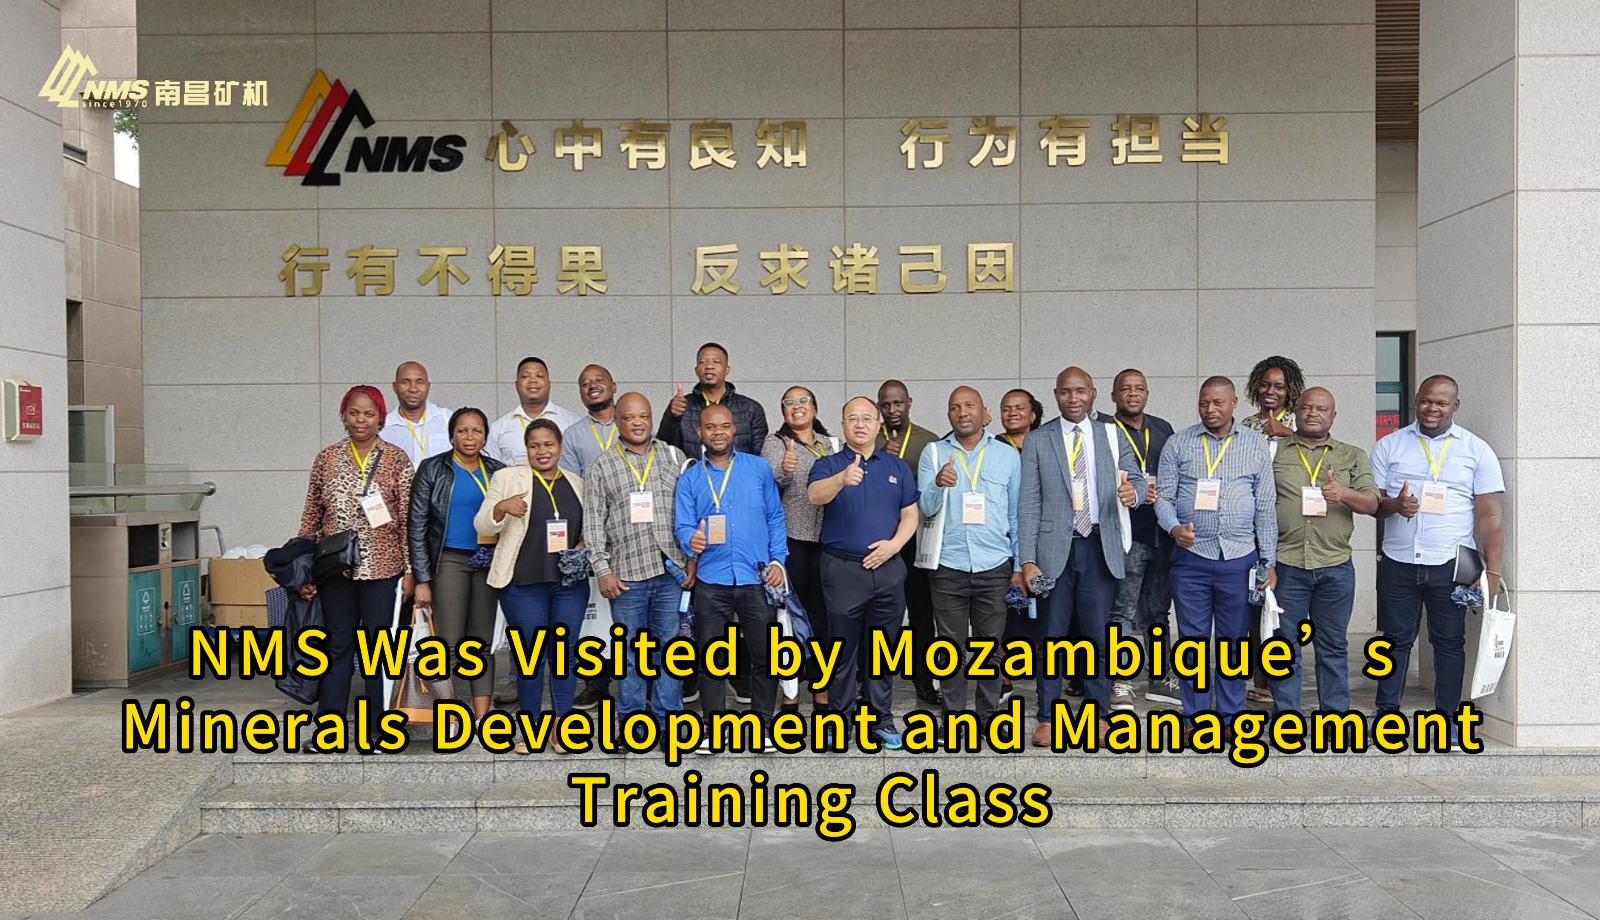 NMS Was Visited by Mozambique’s Minerals Development and Management Training Class